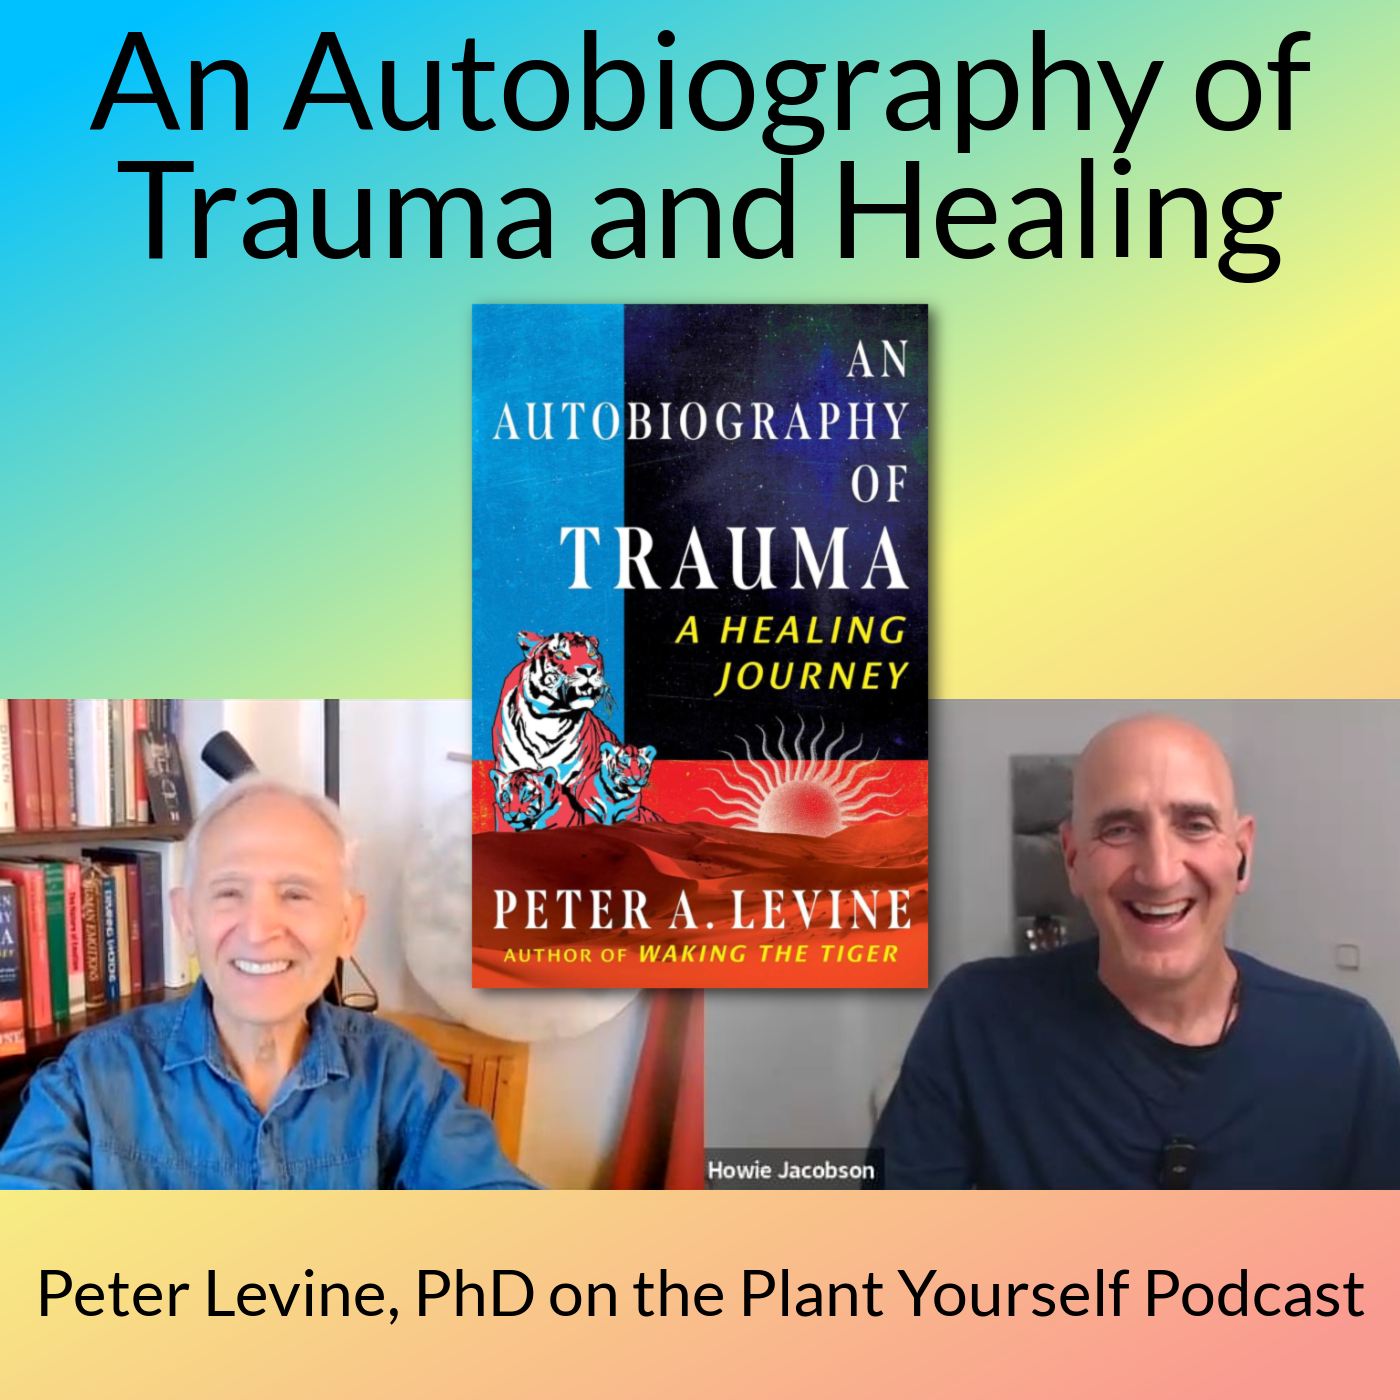 An Autobiography of Trauma and Healing: Peter Levine, PhD, on PYP 581